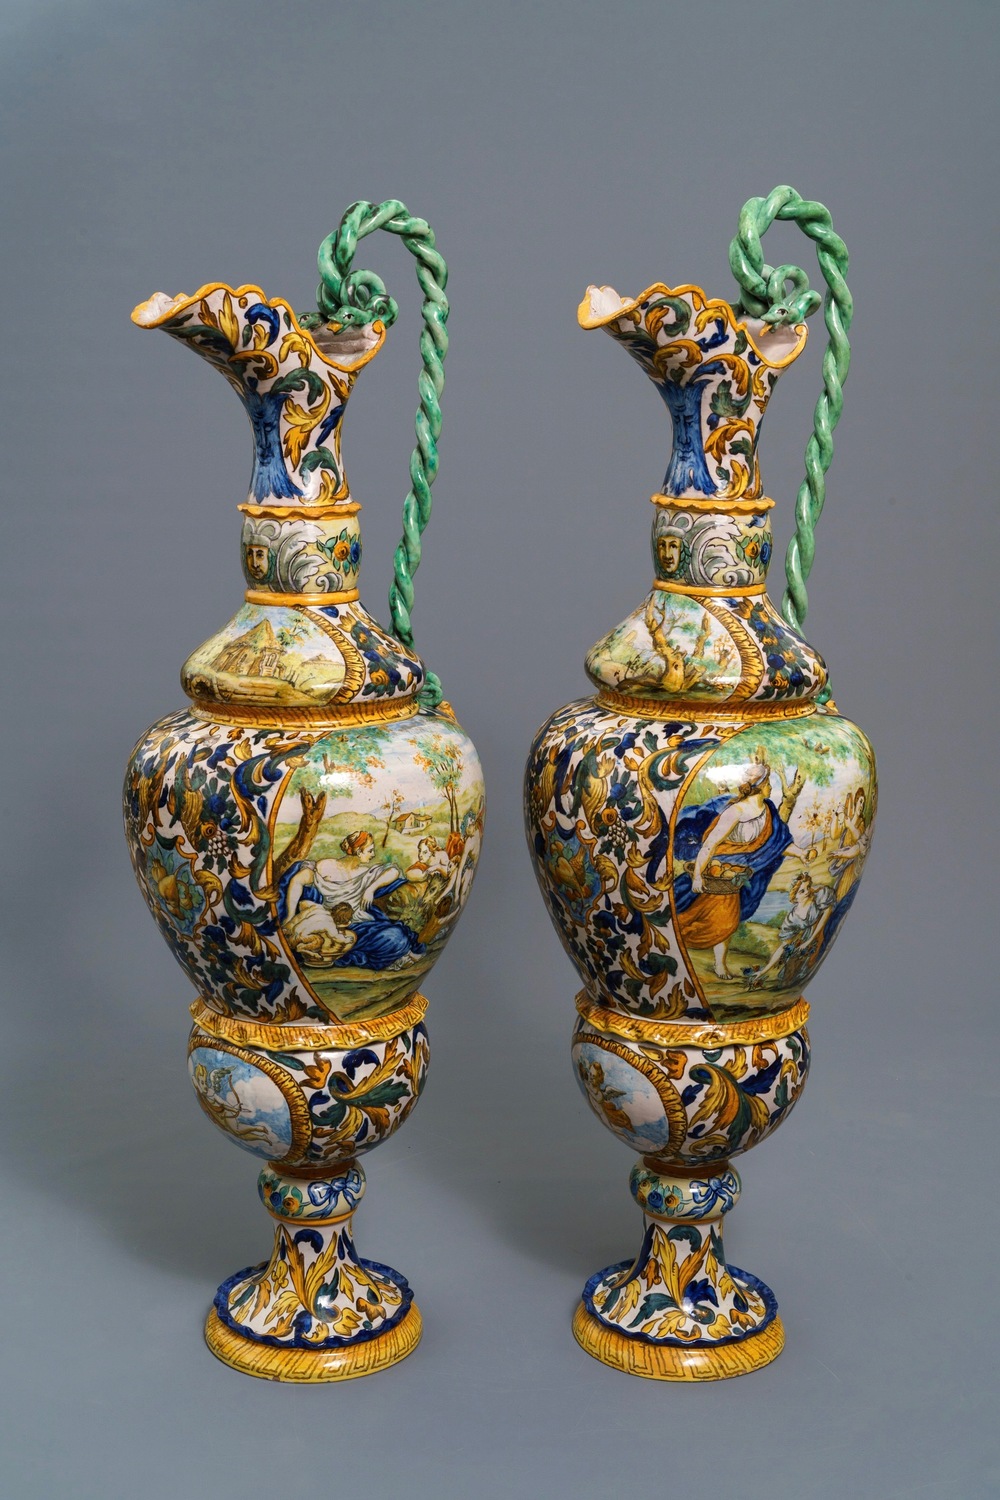 A pair of massive Italian maiolica ewers with figures in landscapes, 19th C.